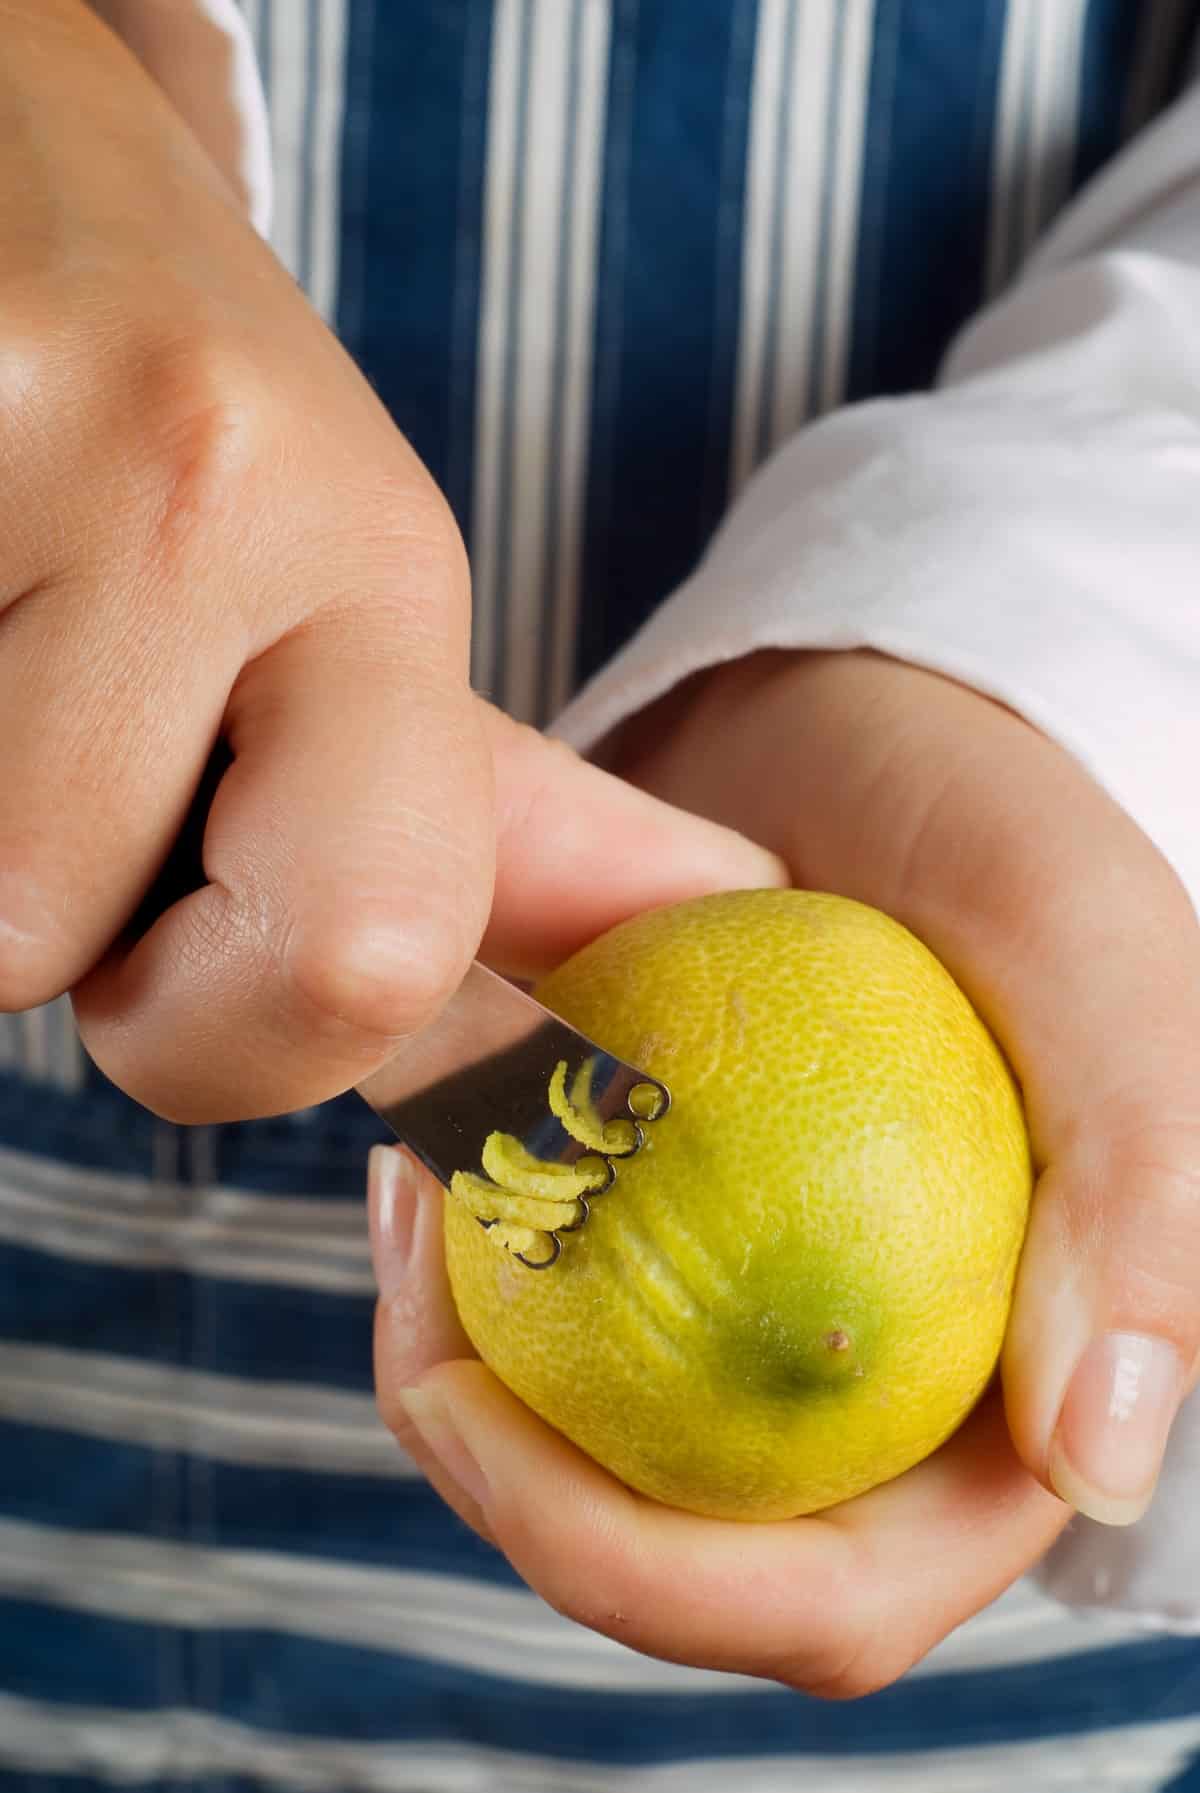 Female woman cook or chef cutting or zesting a lemon.